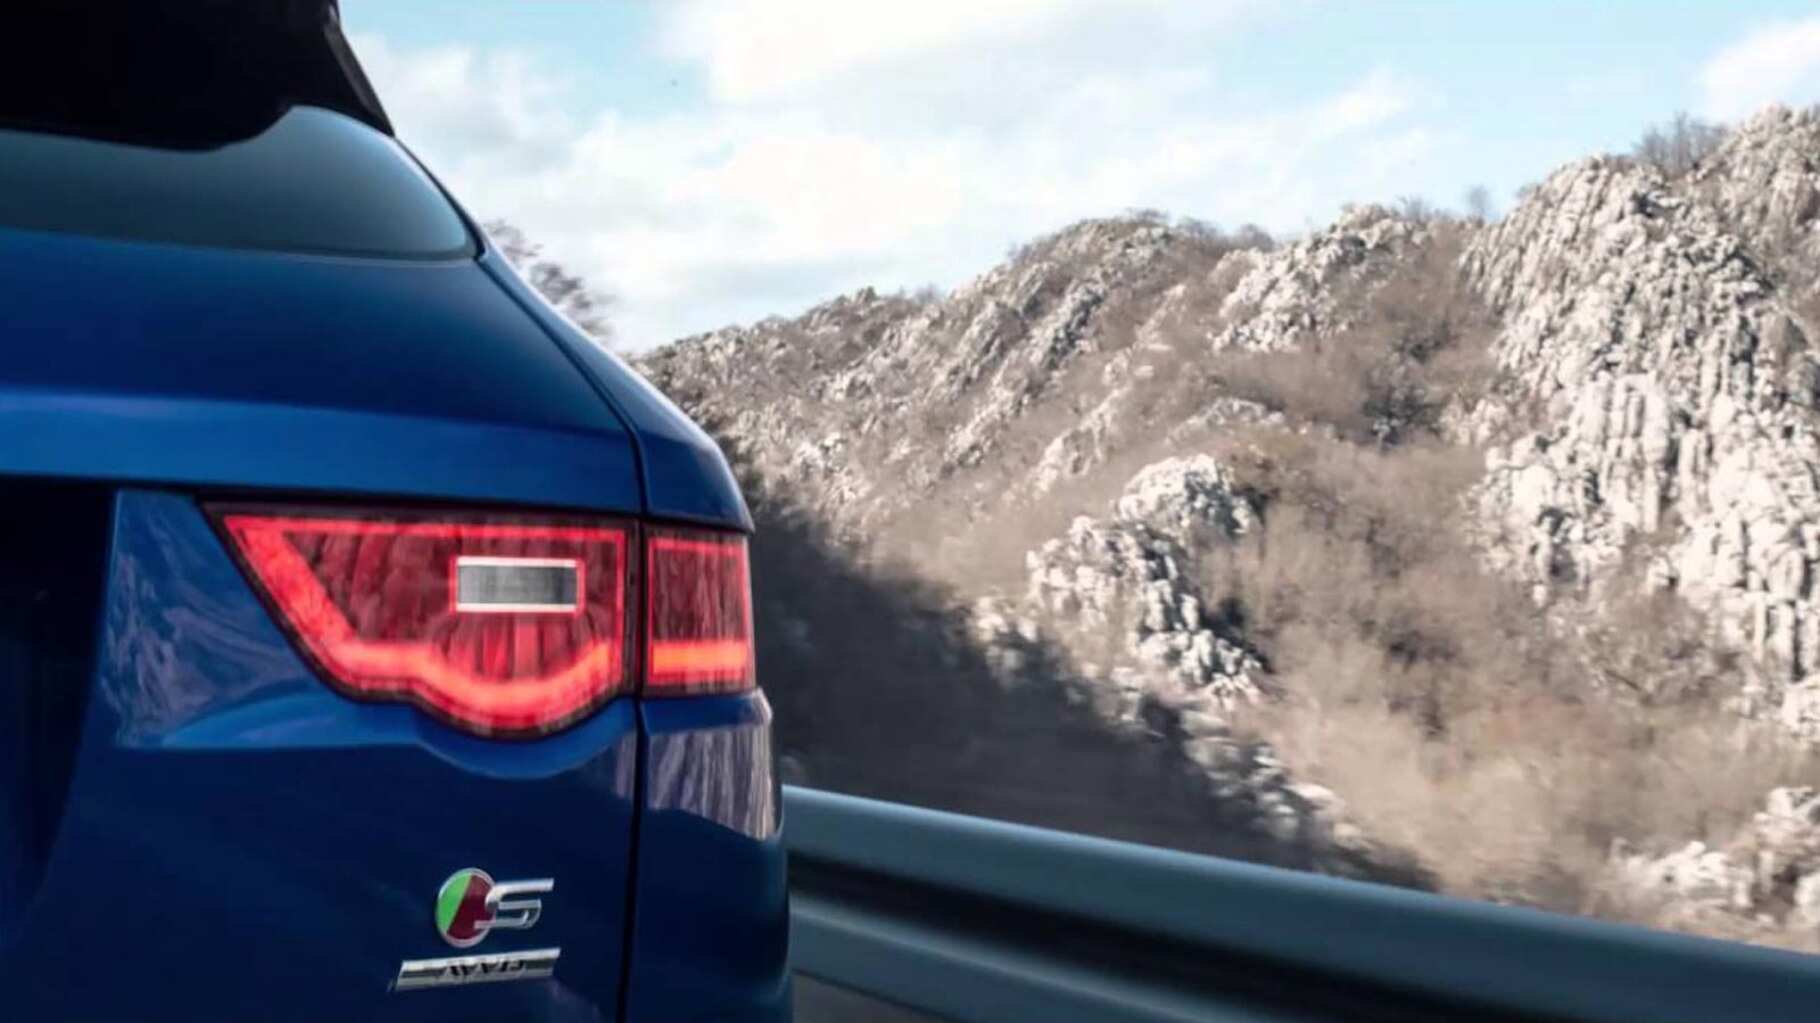 F-pace driving on a road by a mountain.